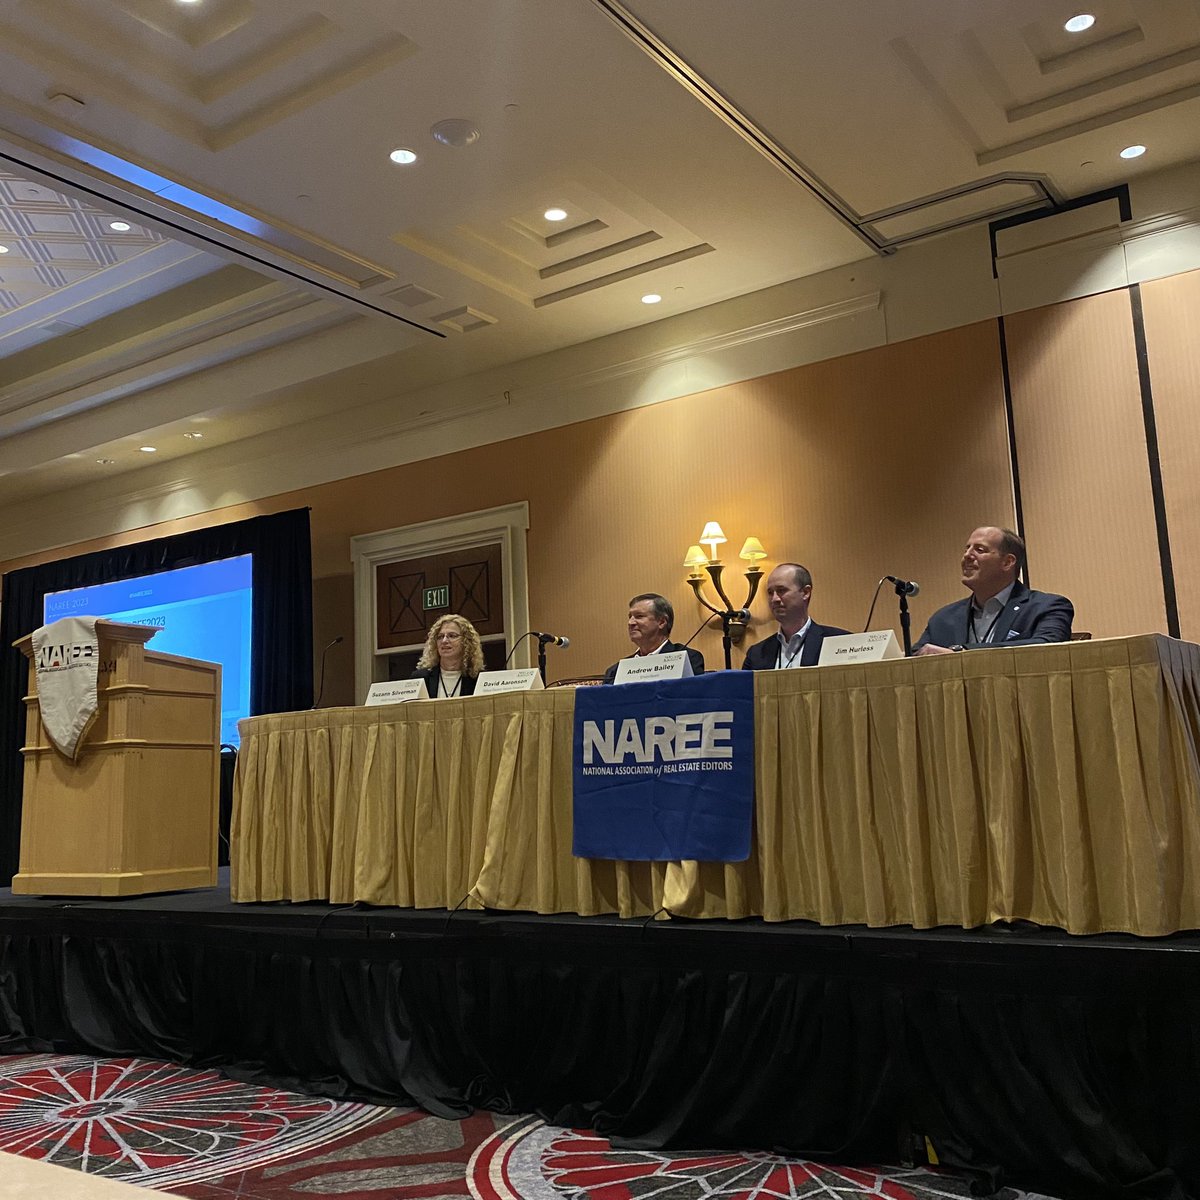 David Aaronson of REVS, Andrew Bailey of Envirospark, and Jim Hurless of CBRE discuss the impact that EV adoption will have on real estate properties across the country. #NAREE2023